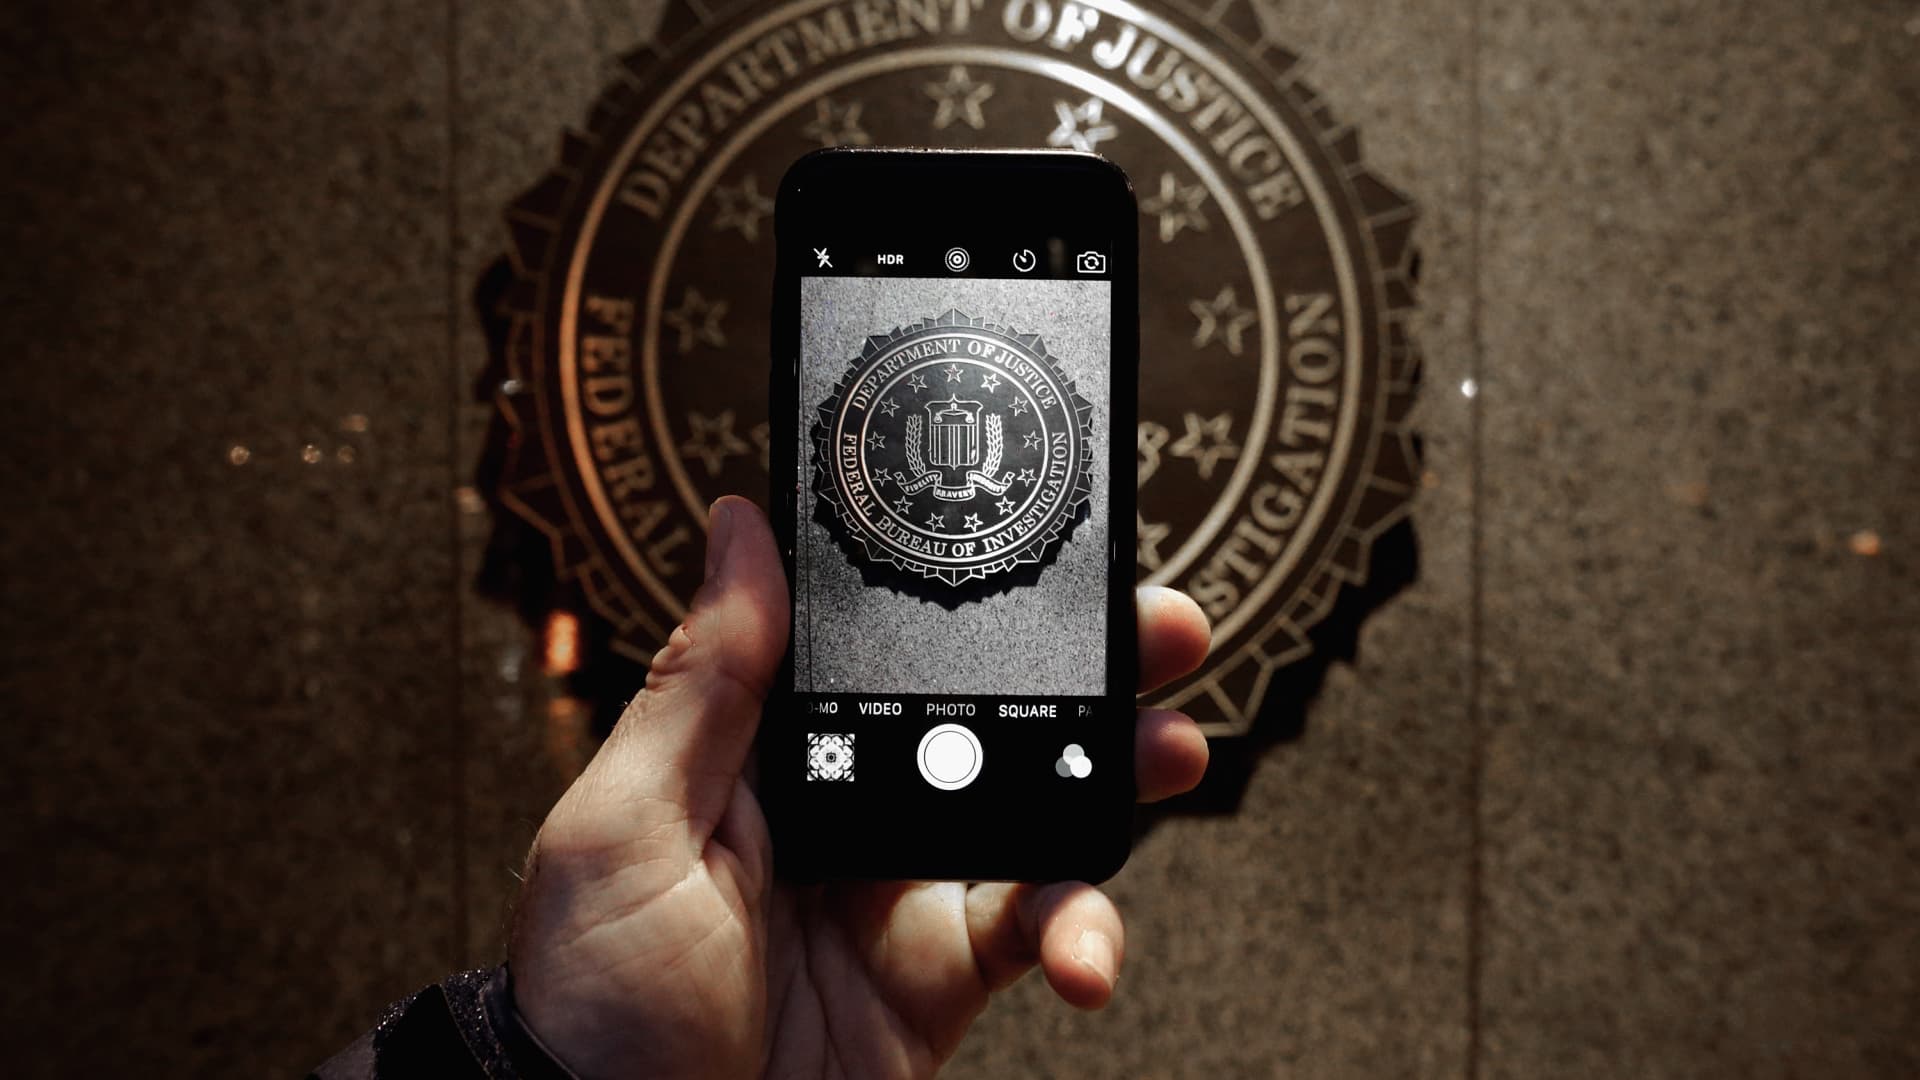 After Apple vs. FBI, more reasons to be wary in privacy fight